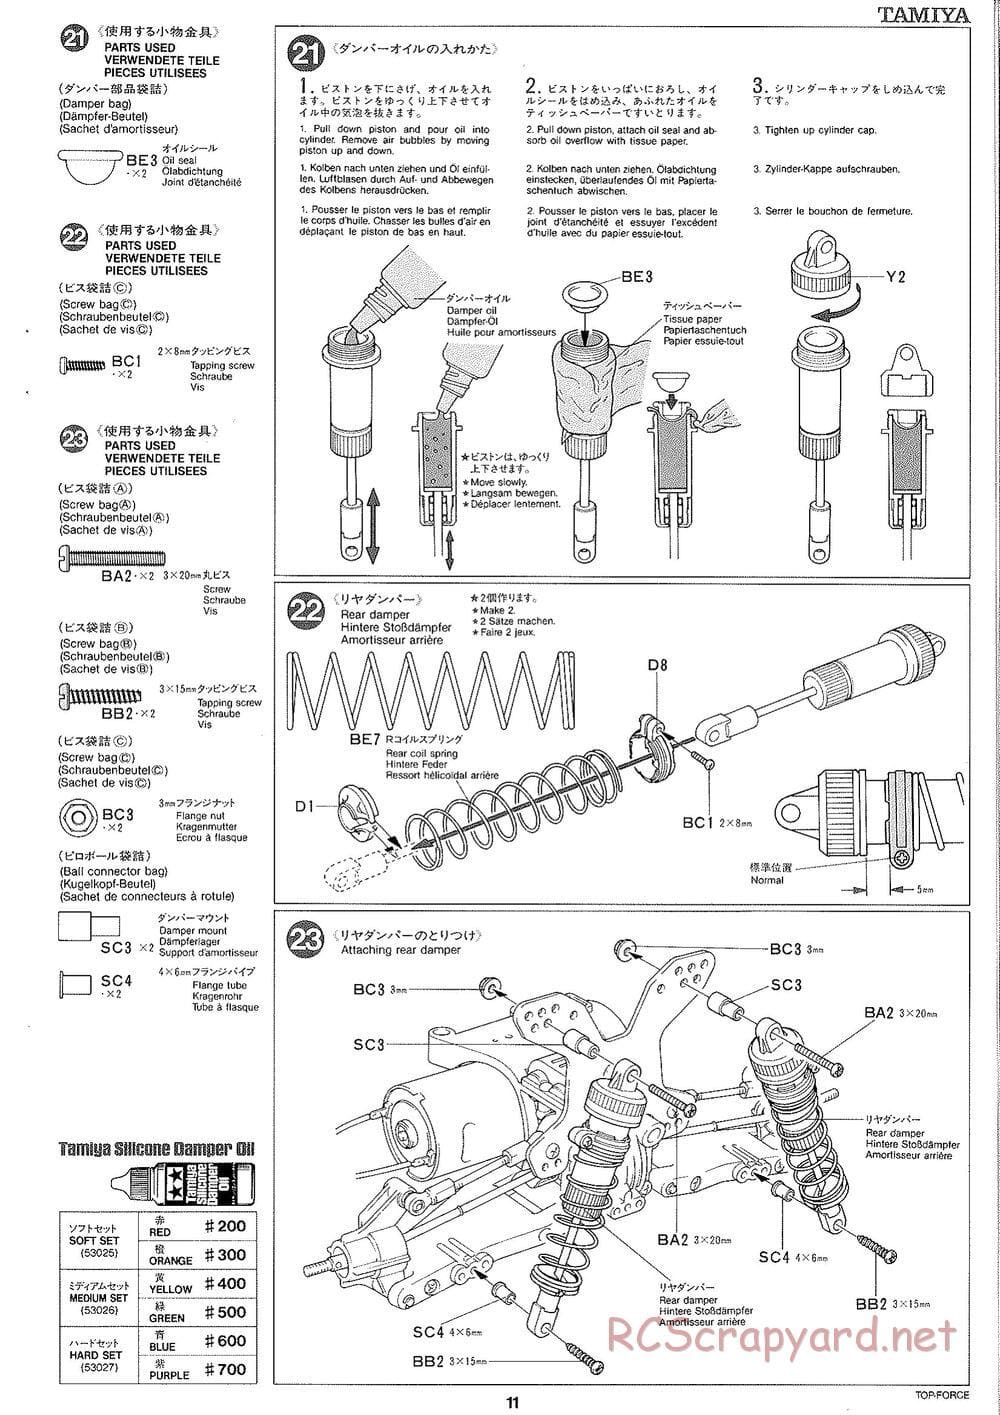 Tamiya - Top Force 2005 - DF-01 Chassis - Manual - Page 11